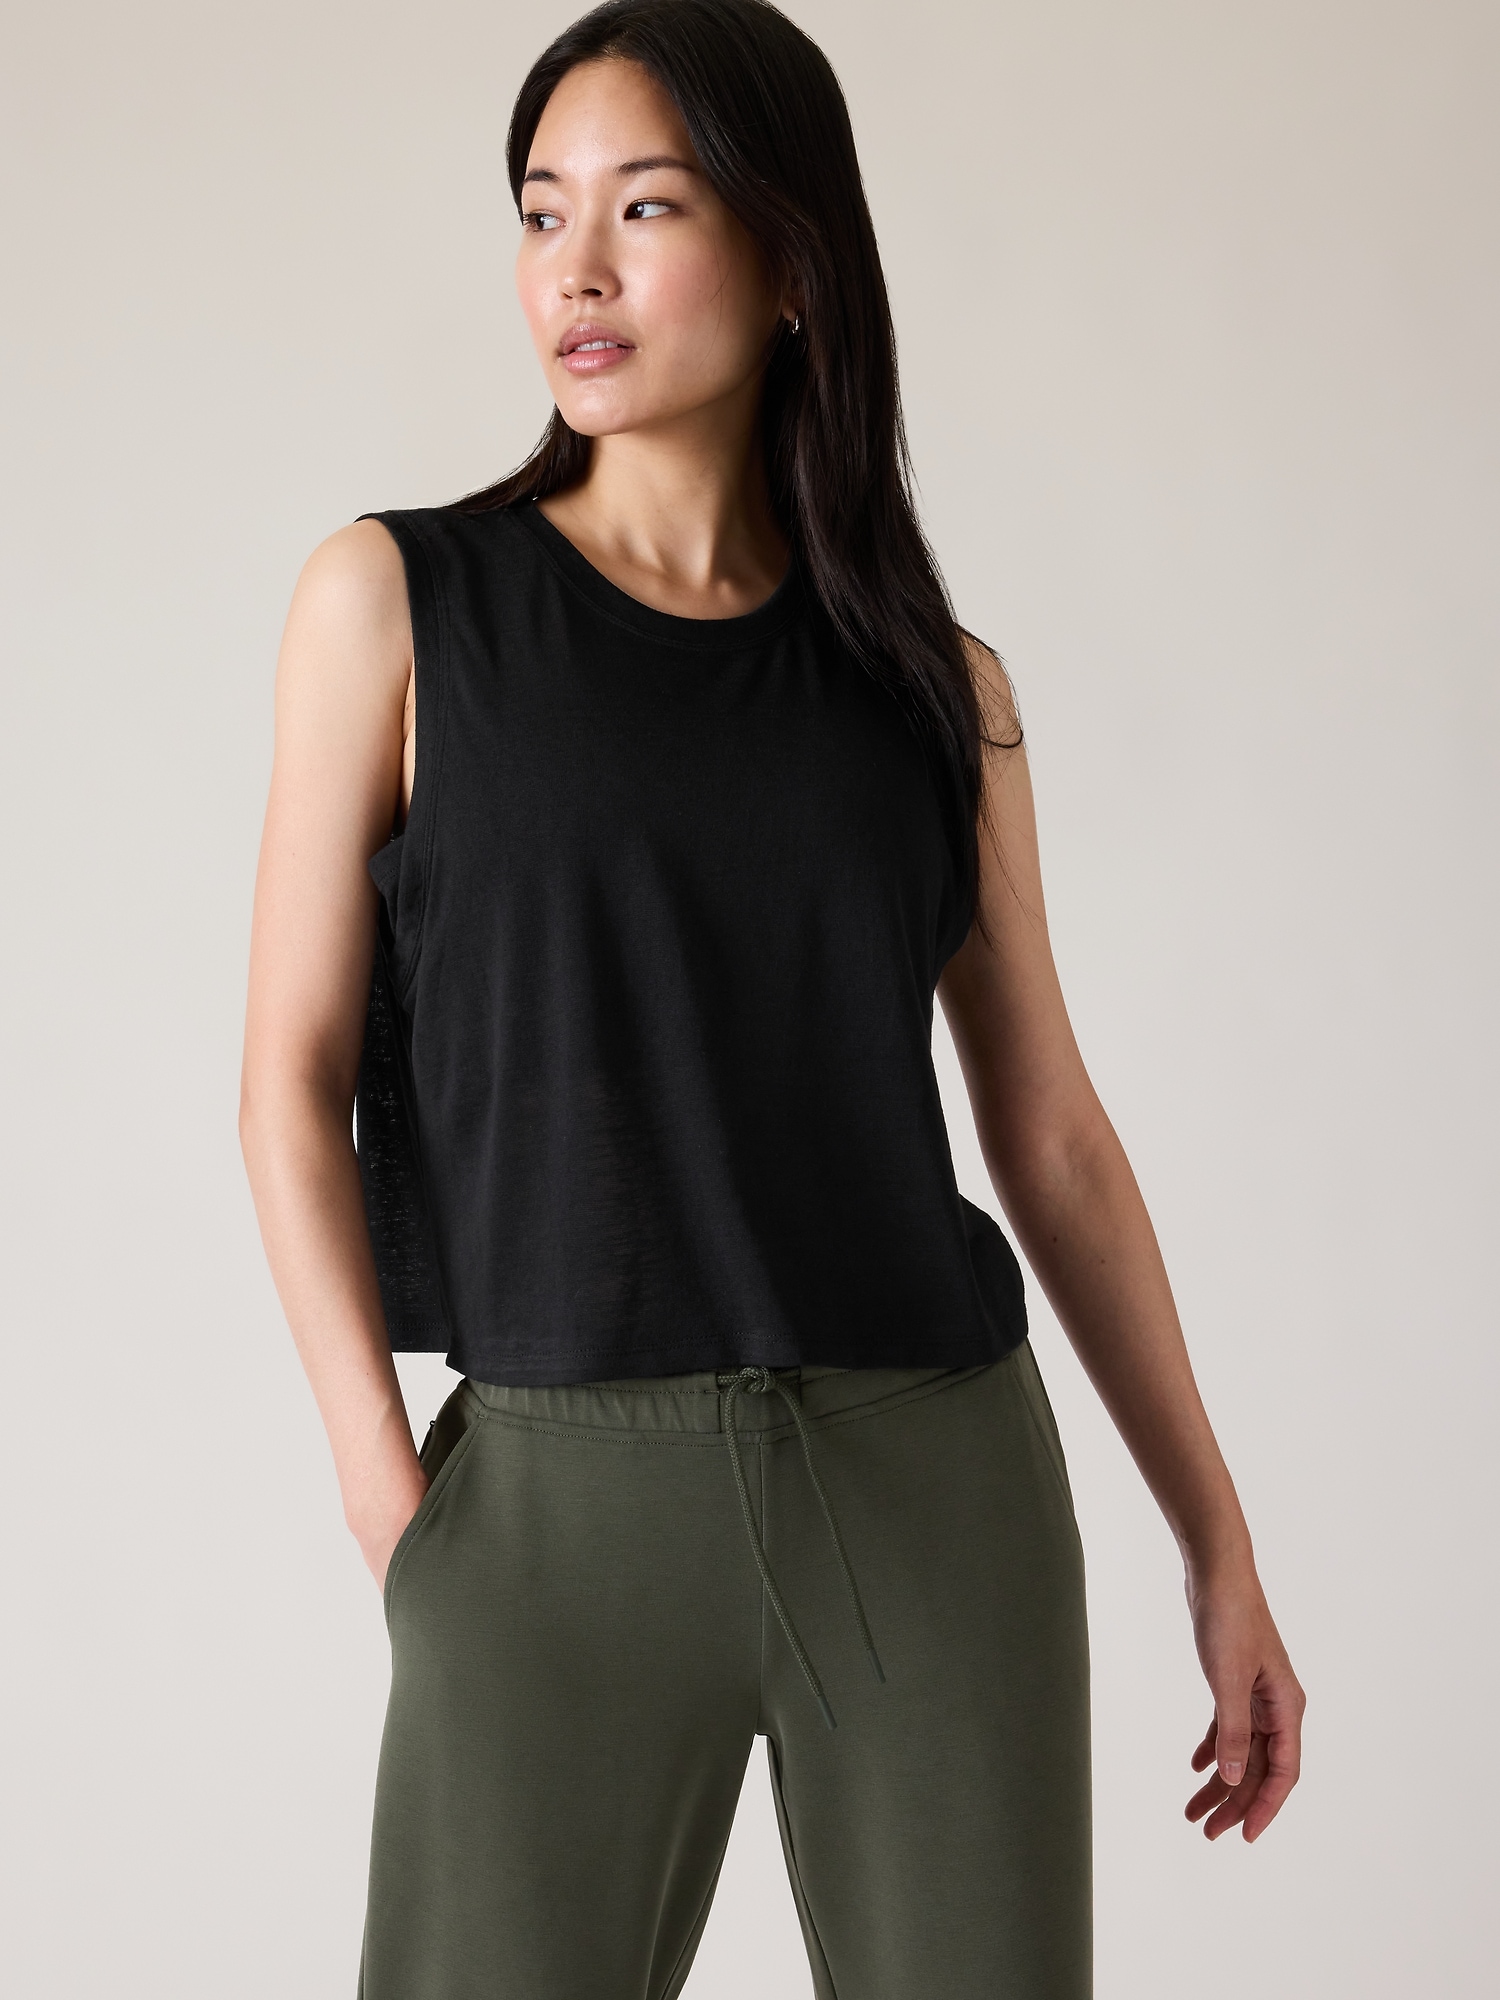 Women's Scoop Neck Sweater Tank Top - A New Day™ Olive Green L